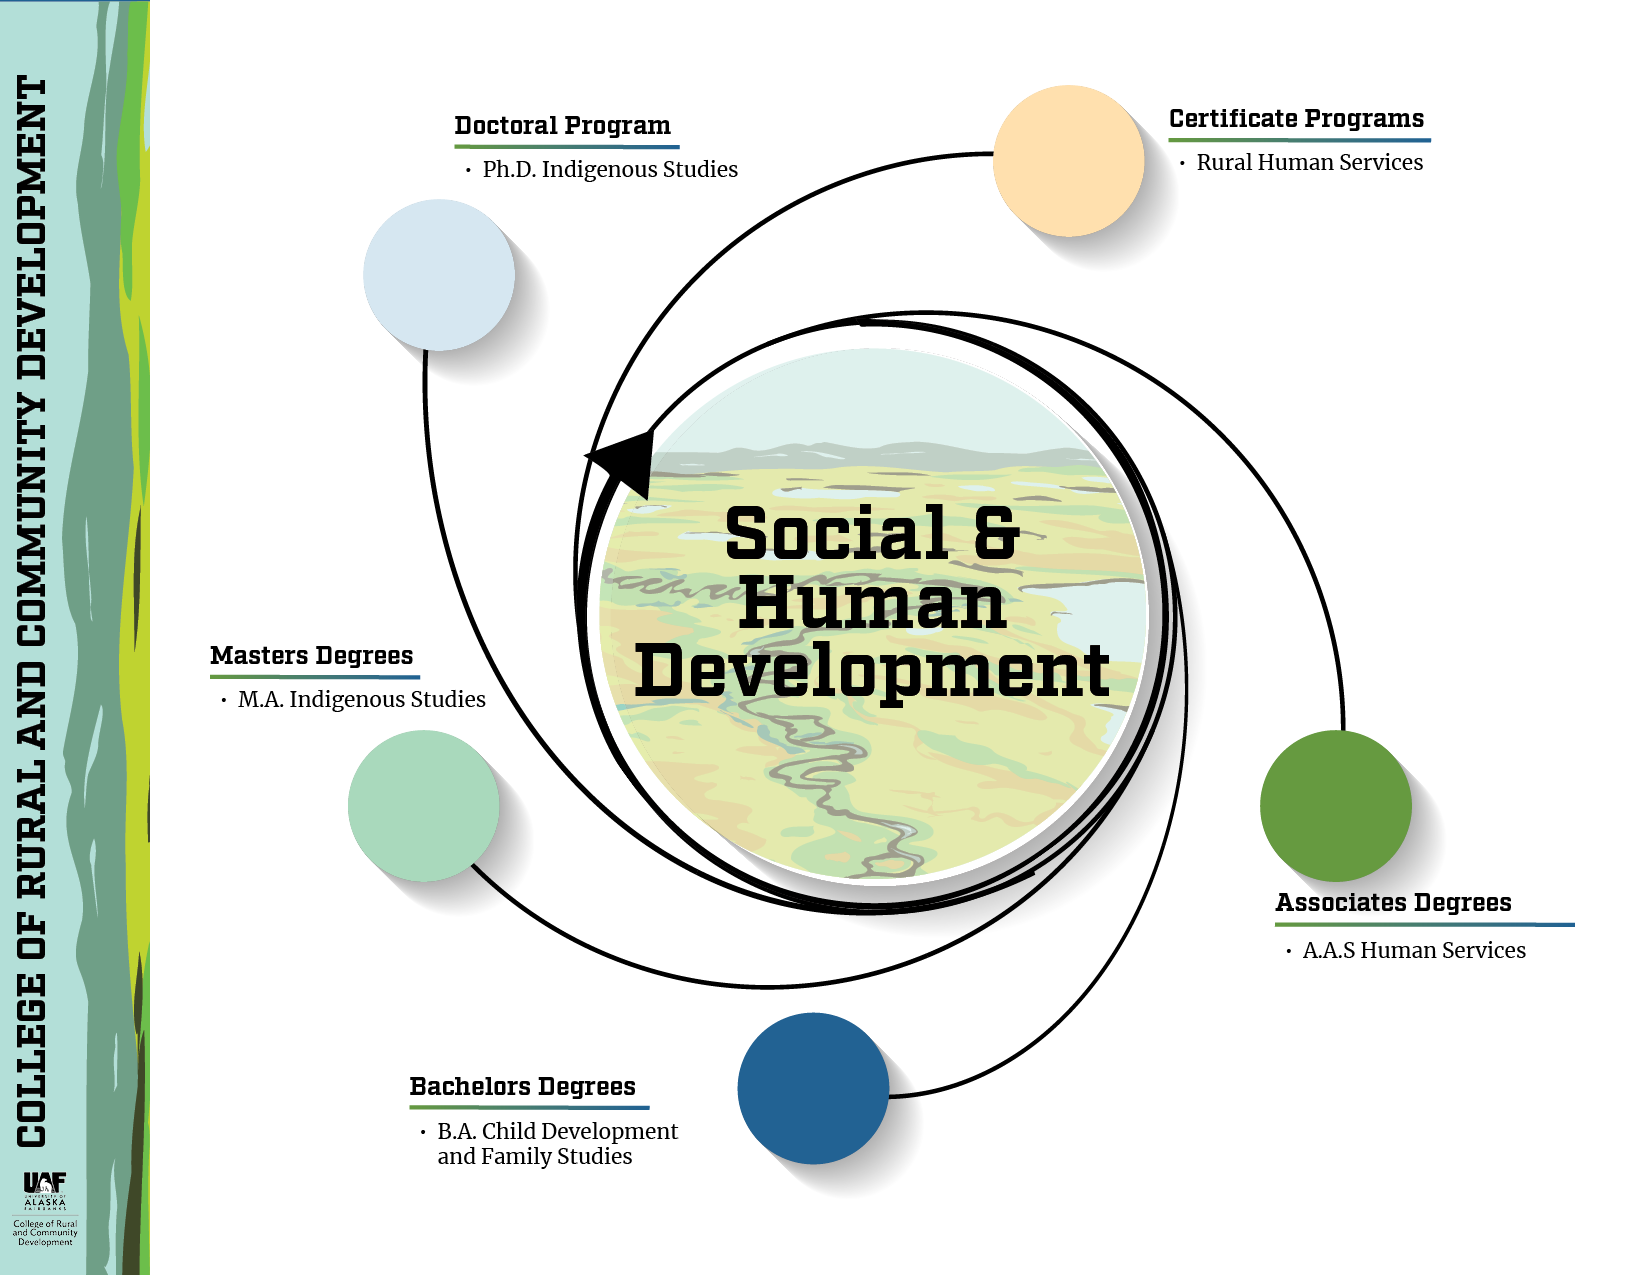 Social and Human Development Pathway